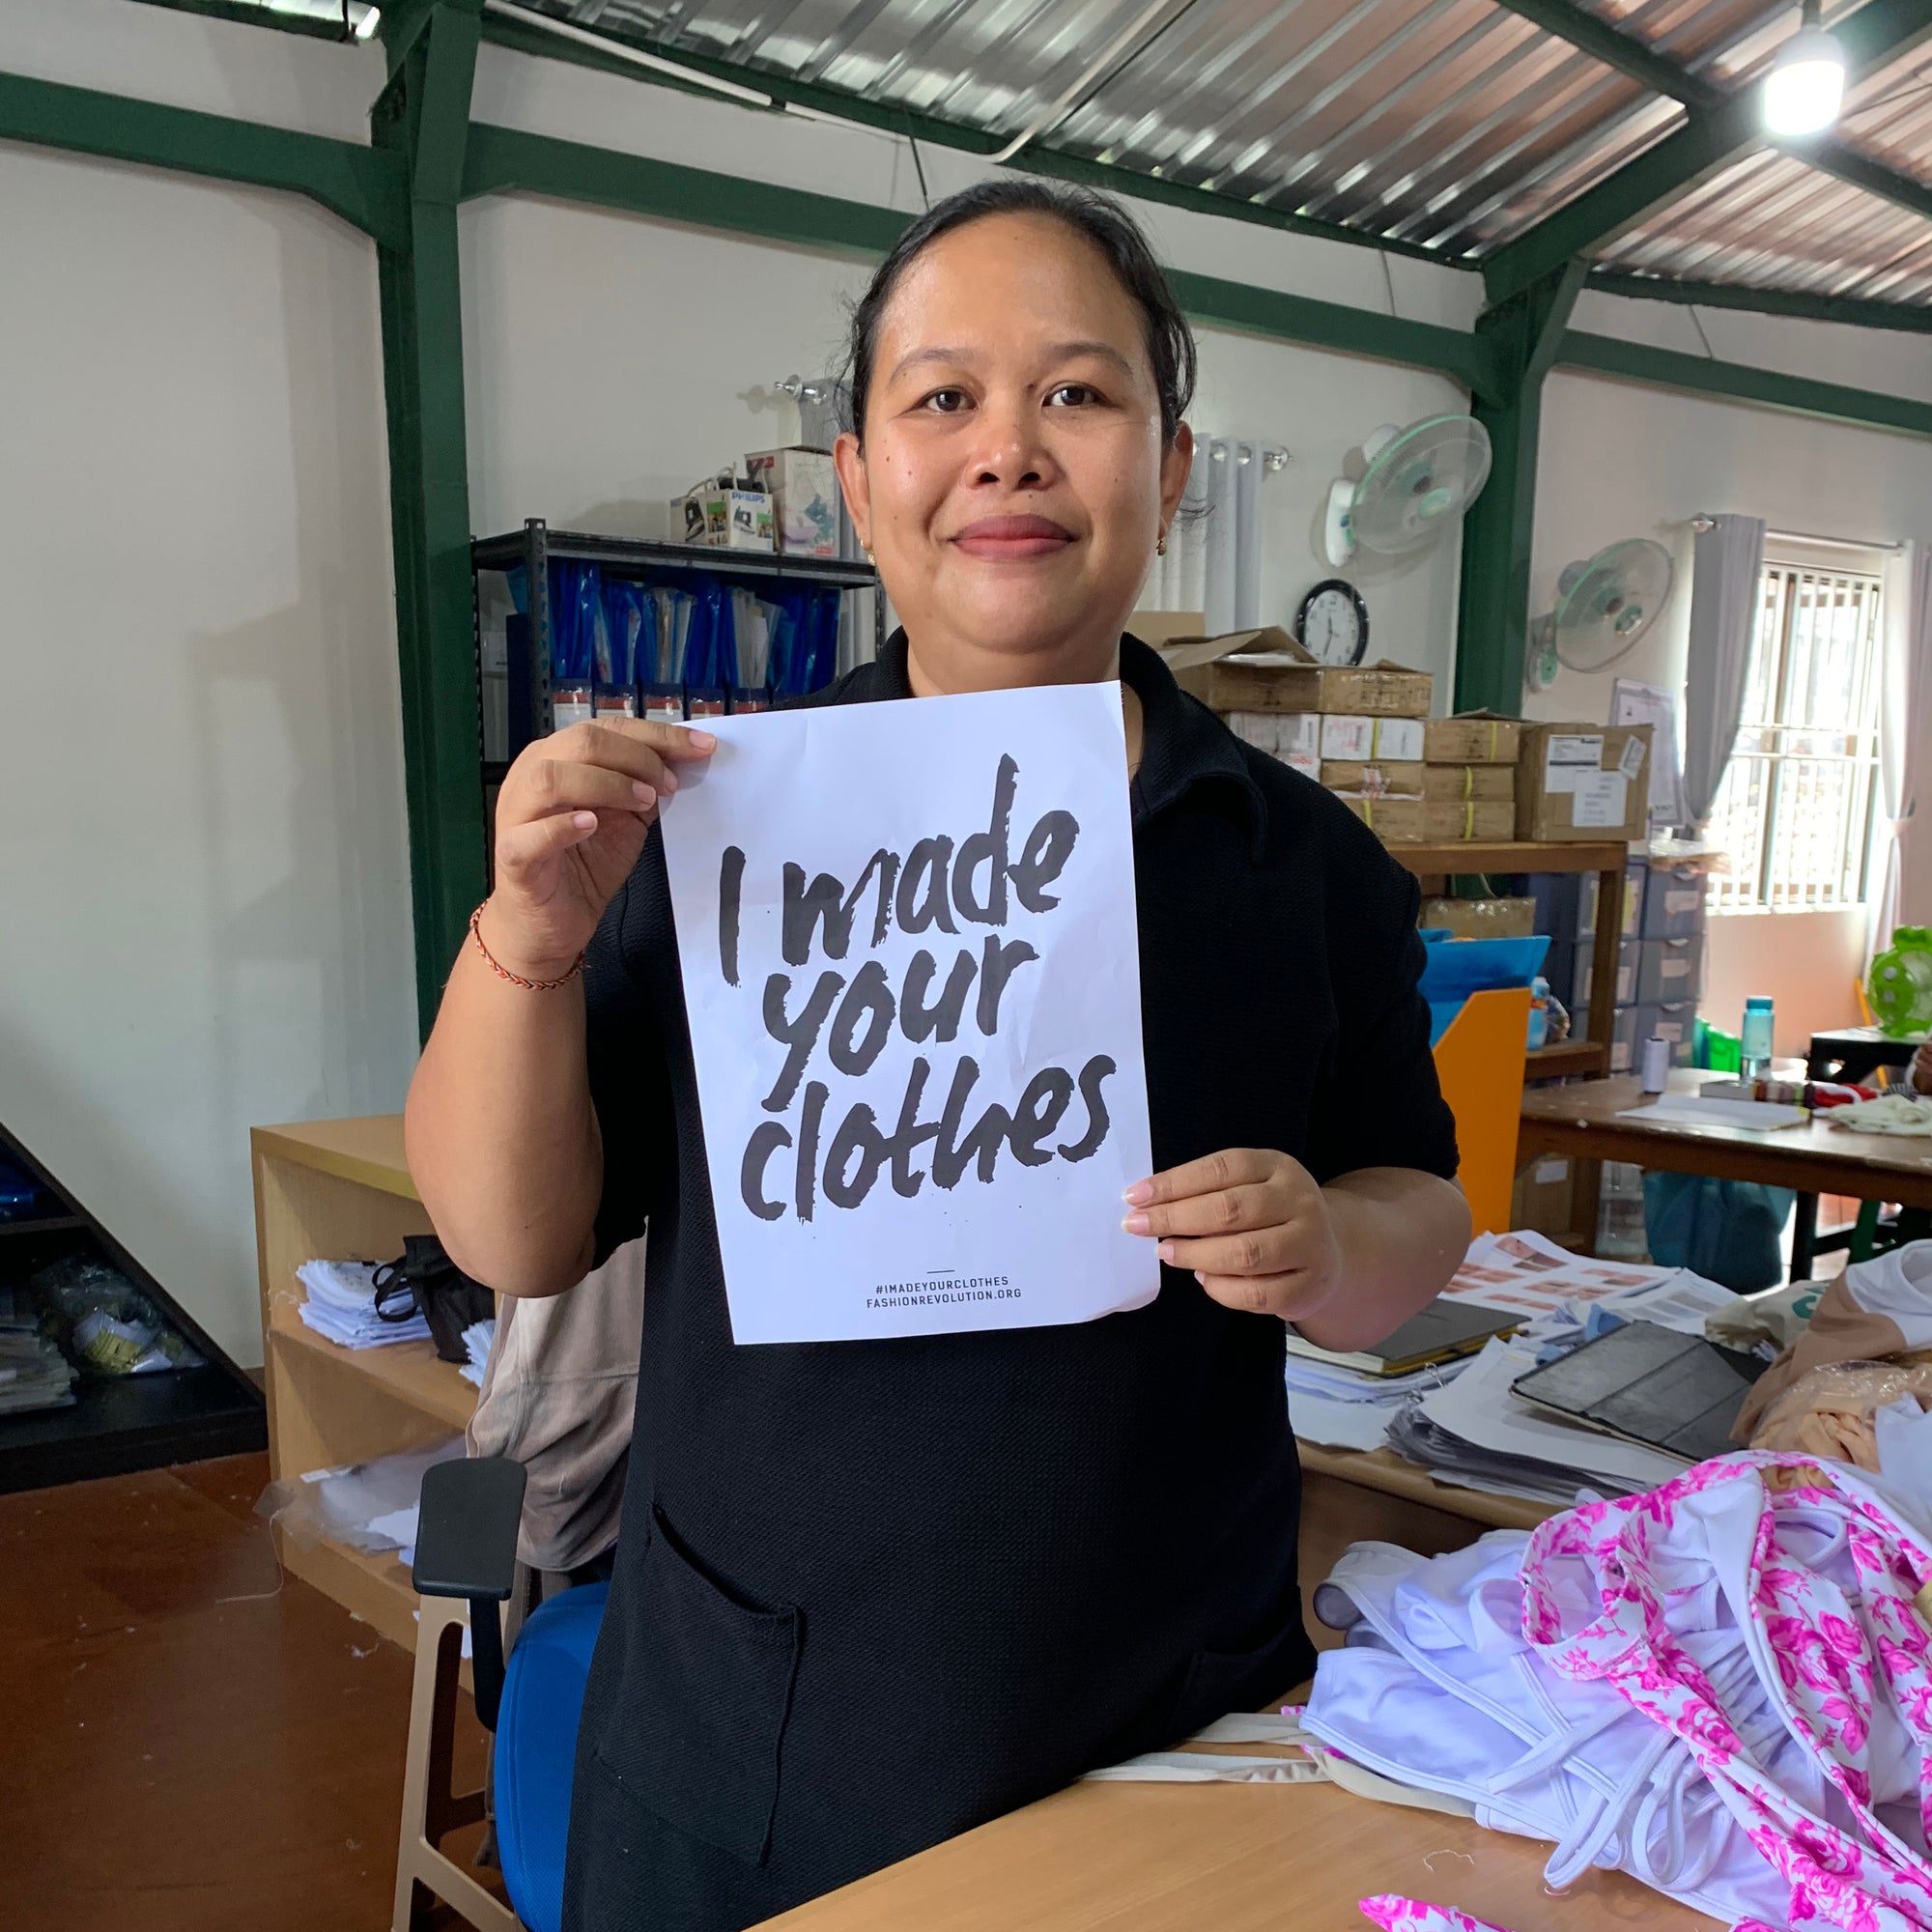 Woman smiling standing in a factory holding a sign that says I made your Cloths